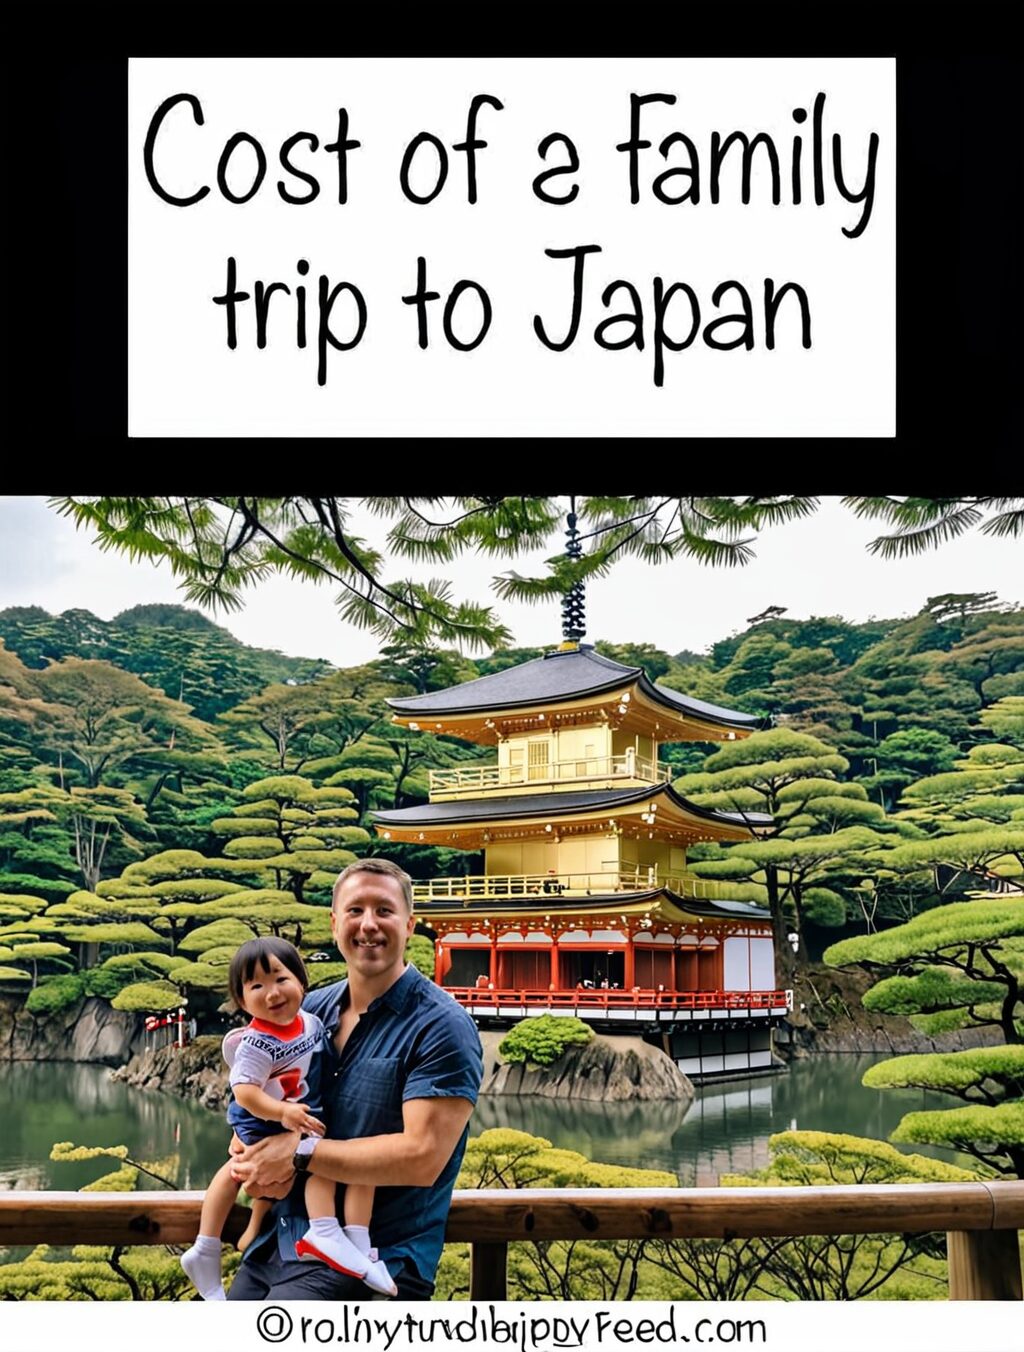 family trip to japan cost reddit